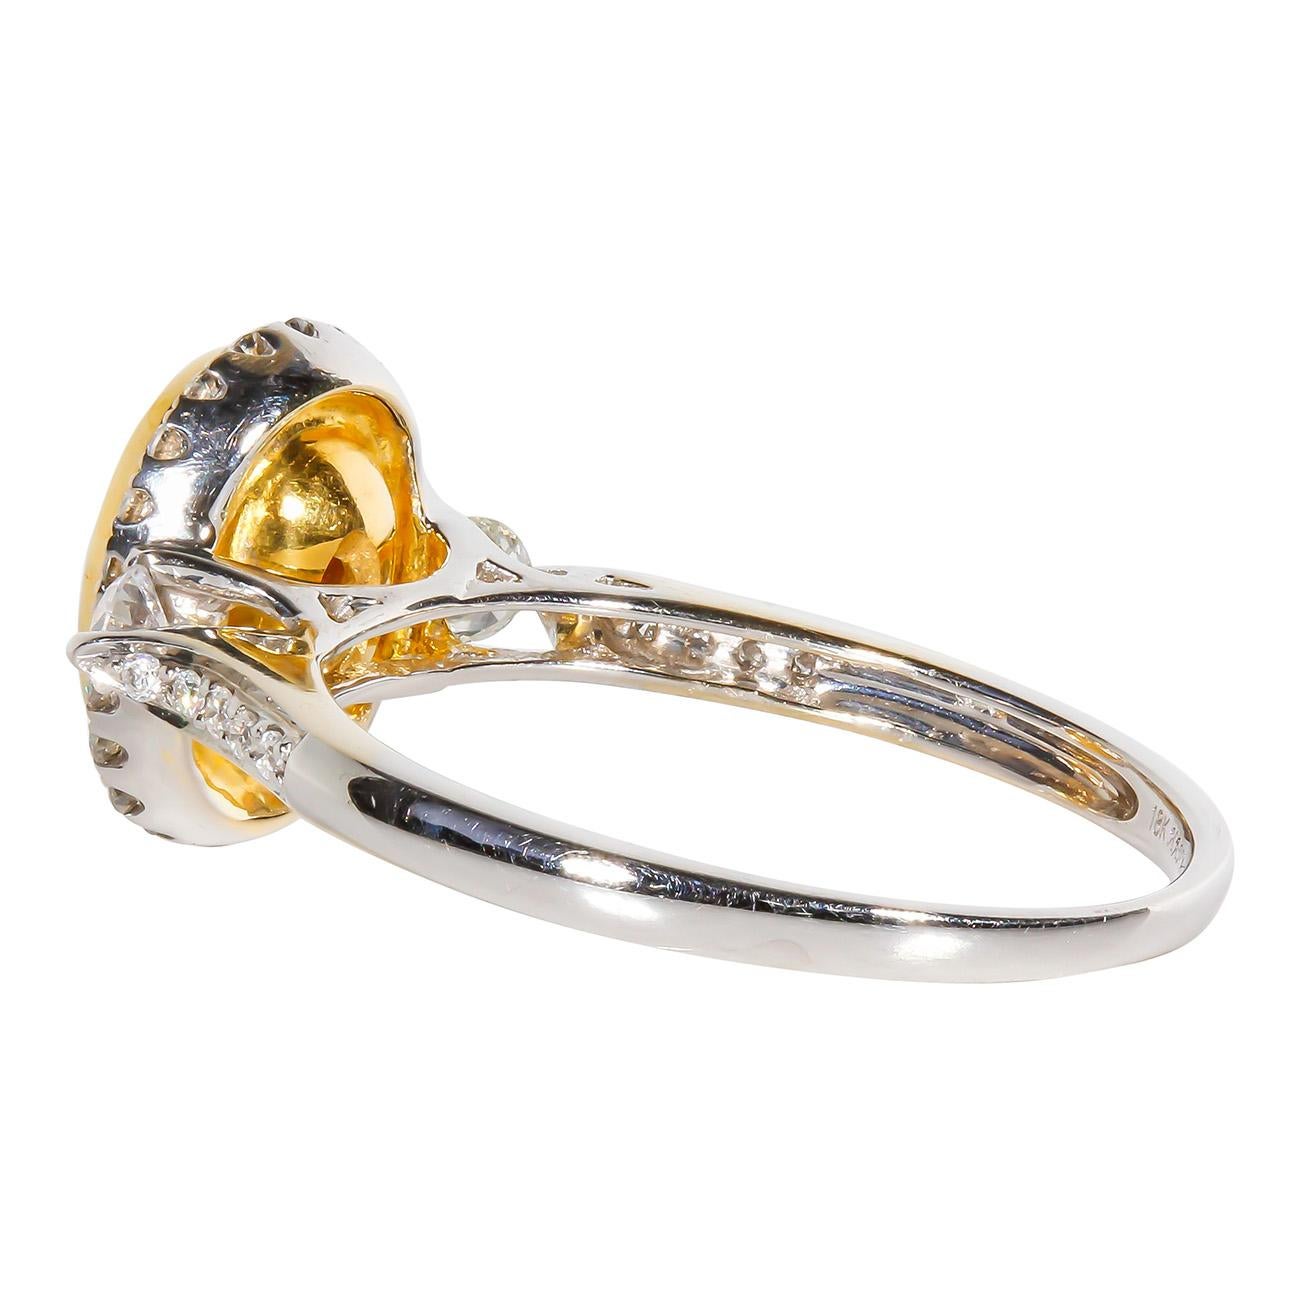 Women's Halo Ring in 18K WG with Fancy Light Yellow Oval Diamond Center. D1.36ct.t.w. For Sale